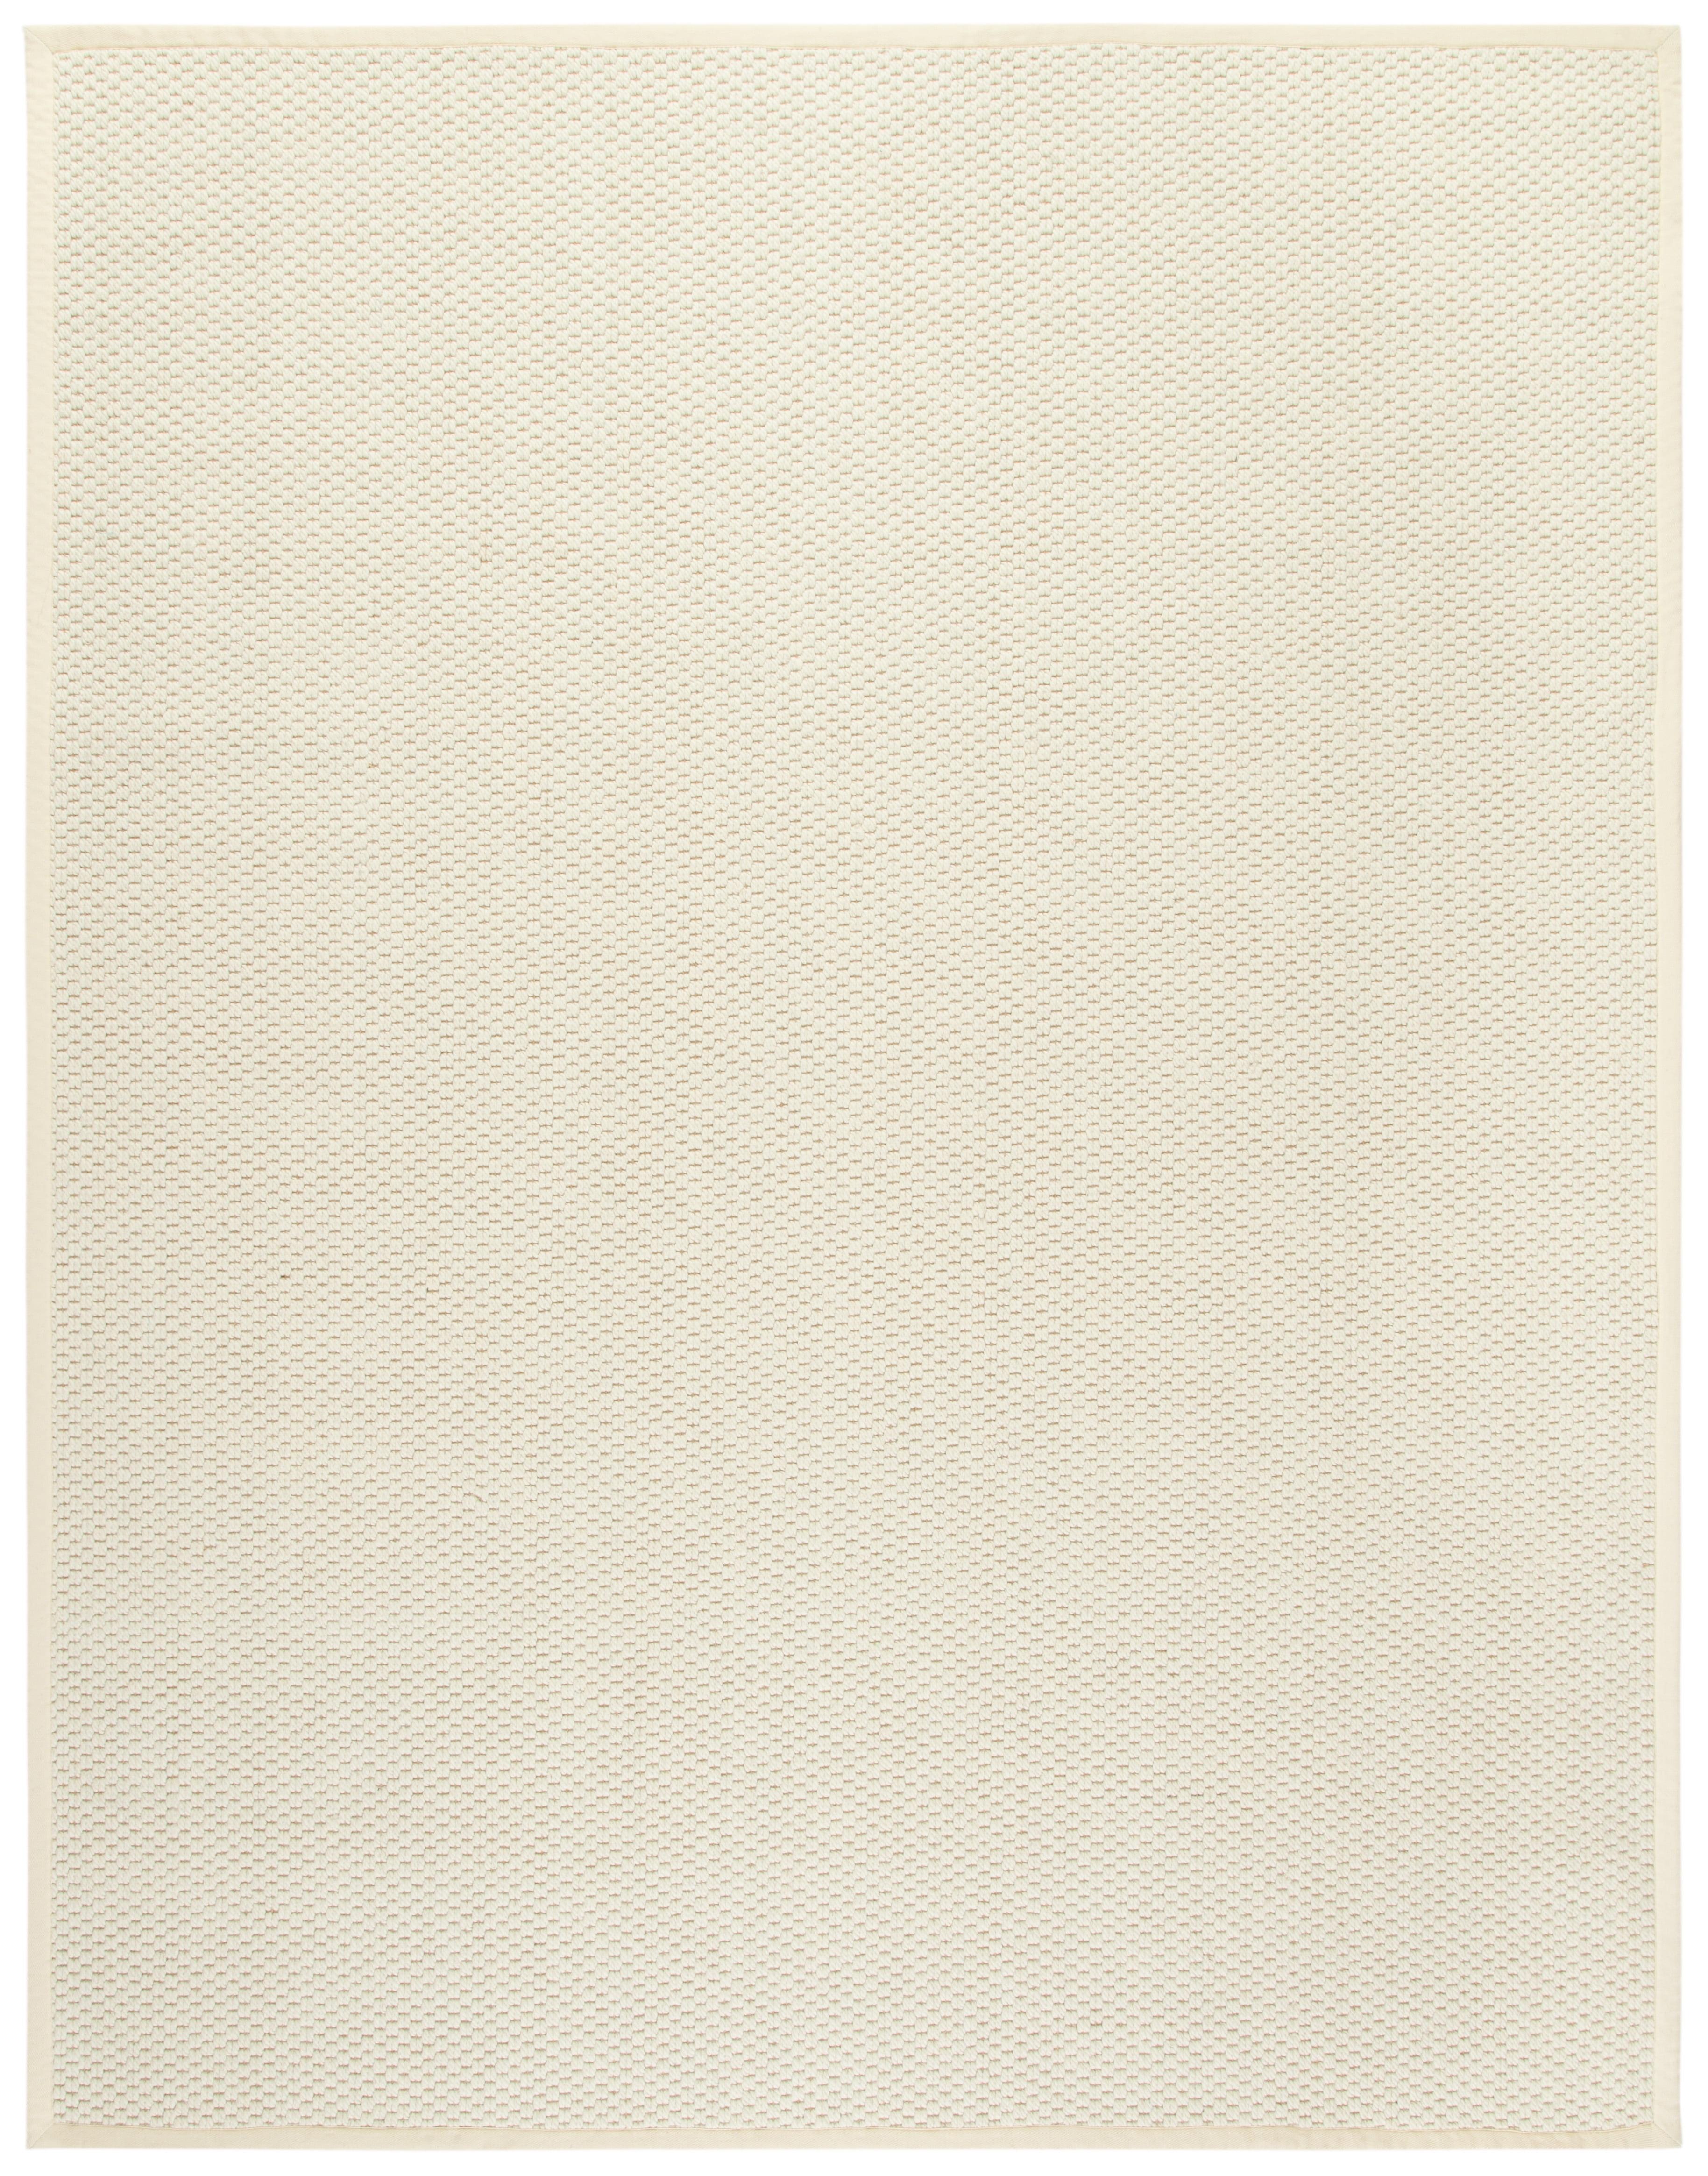 Ivory Hand-Knotted Wool Rectangular Area Rug, 9' x 12'